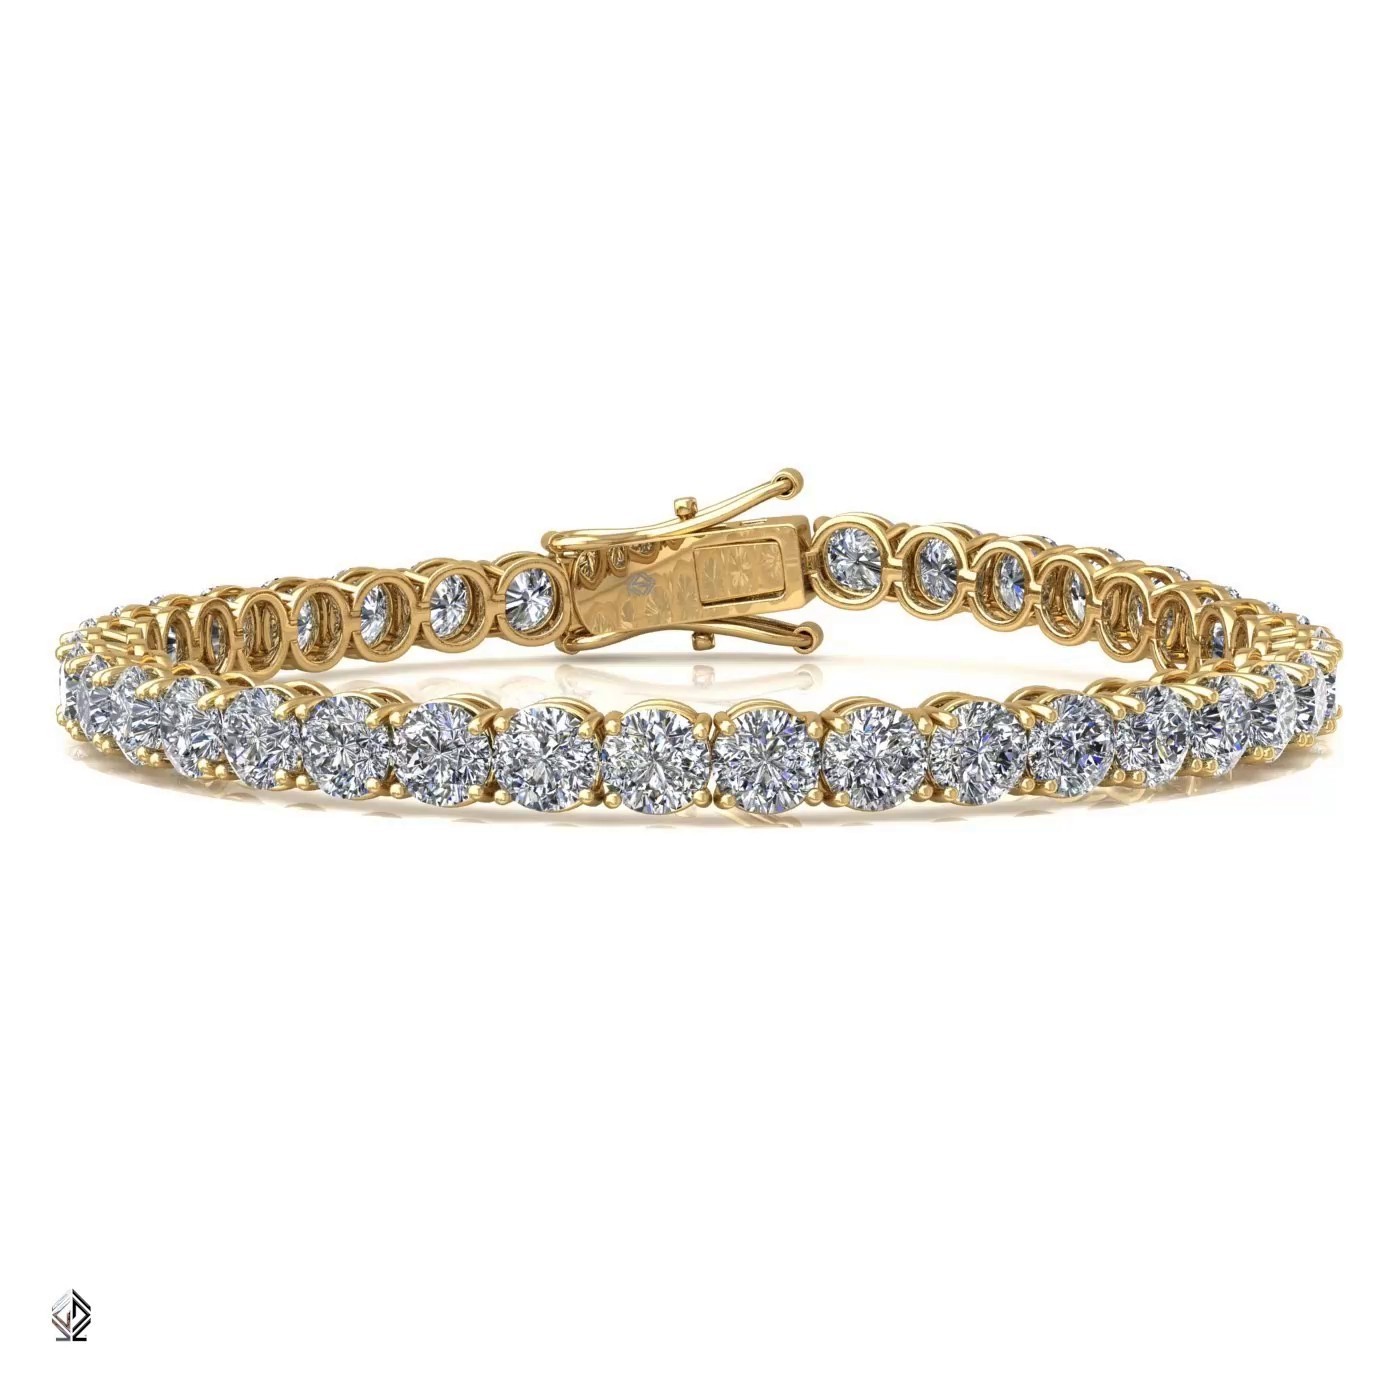 18k yellow gold 2.6mm 4 prong round shape diamond tennis bracelet in round setting Photos & images